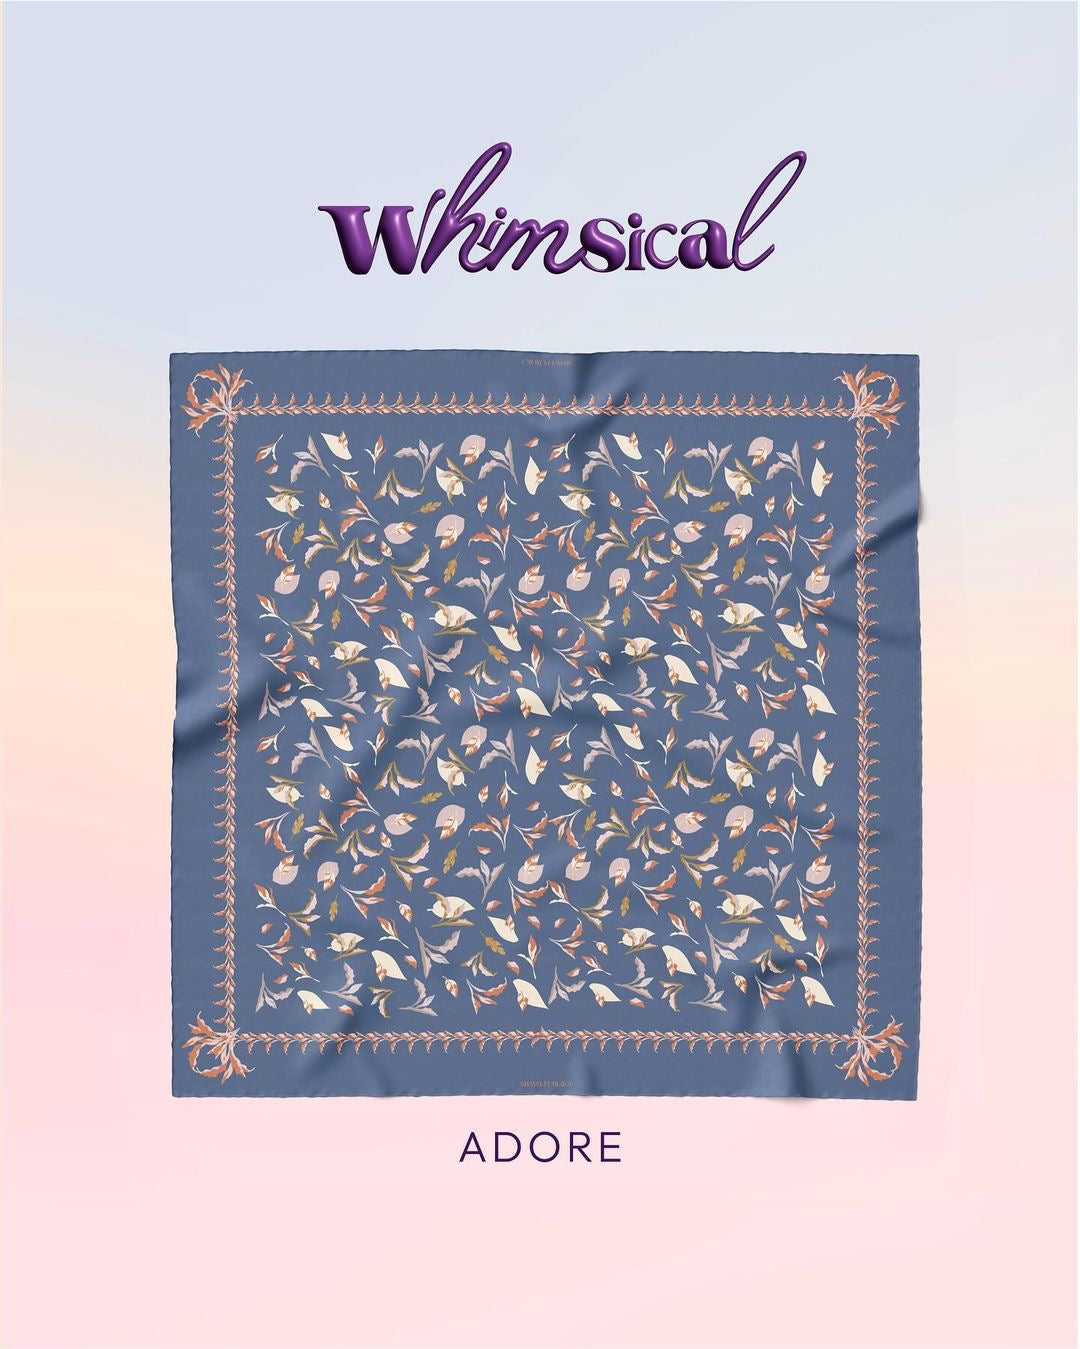 Whimsical in Adore